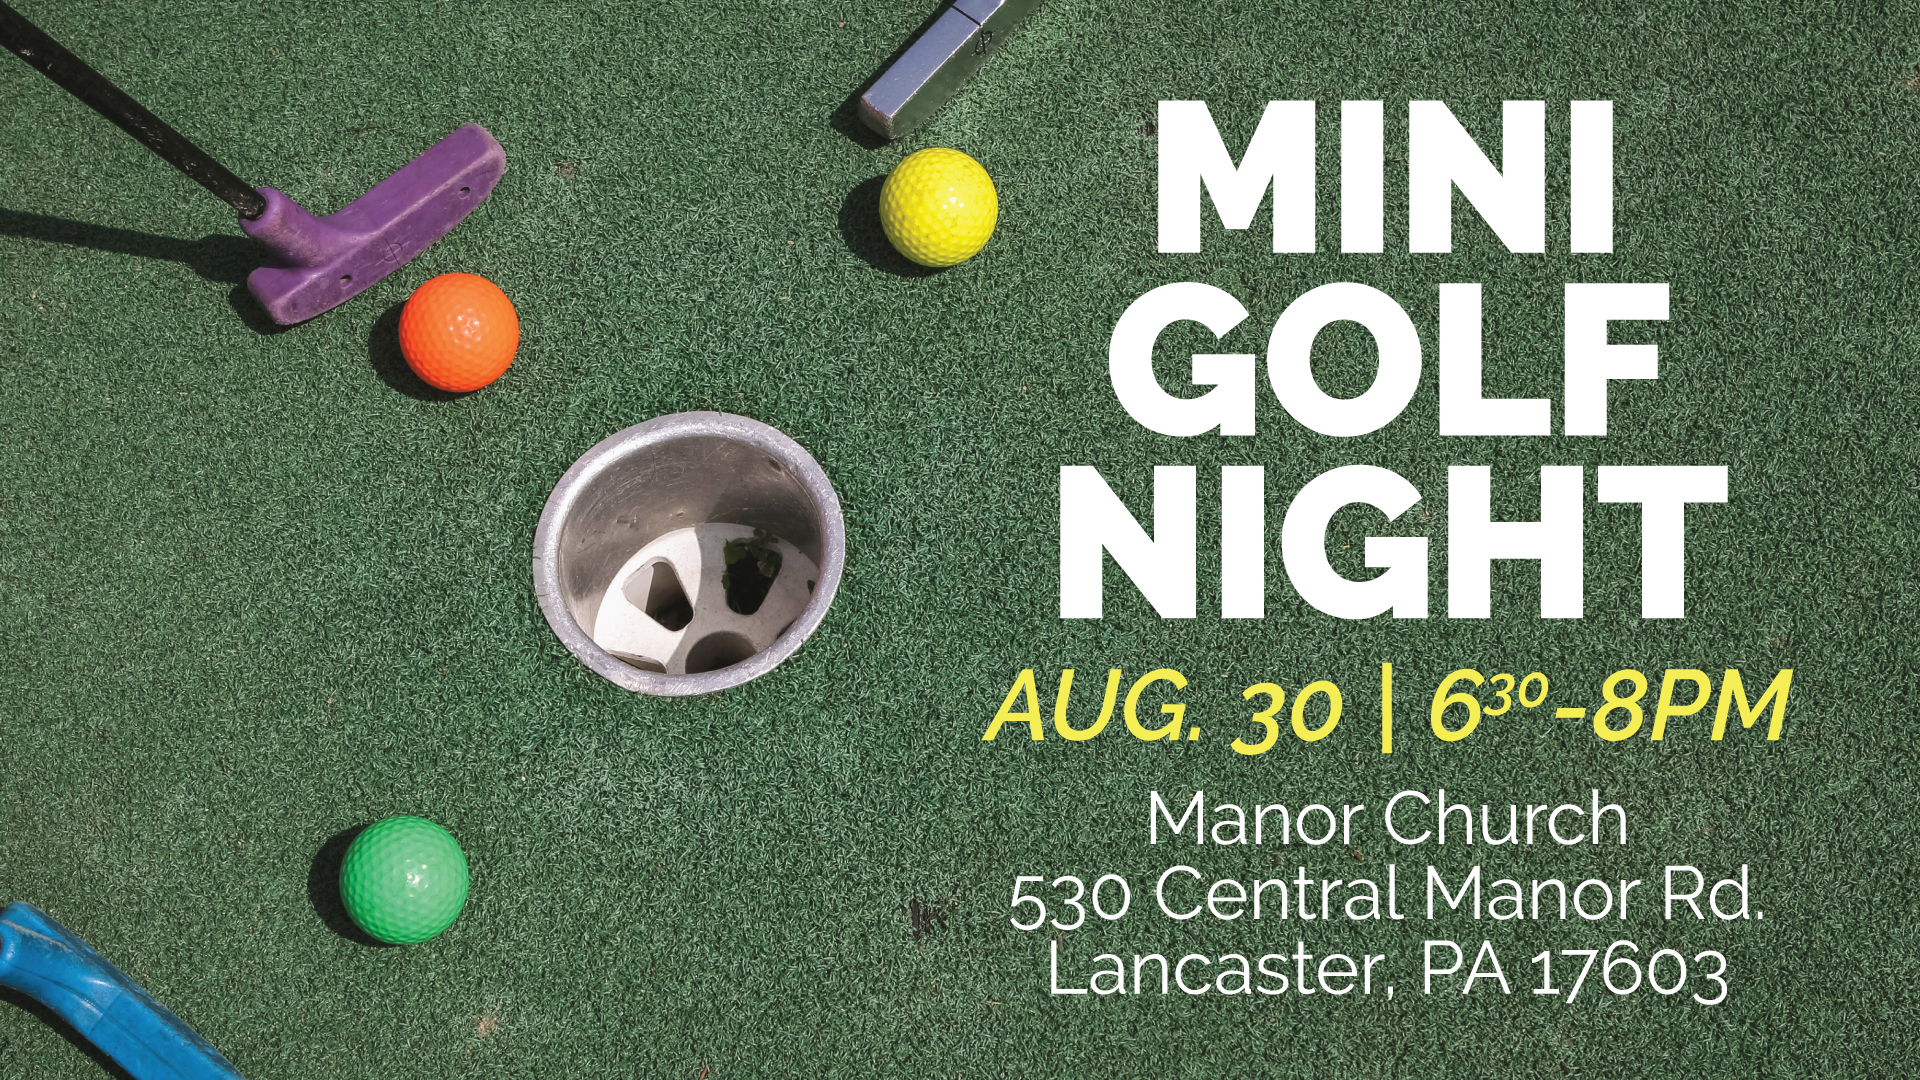 Mini Golf Night | August 30 from 6:30-8PM at Manor Church